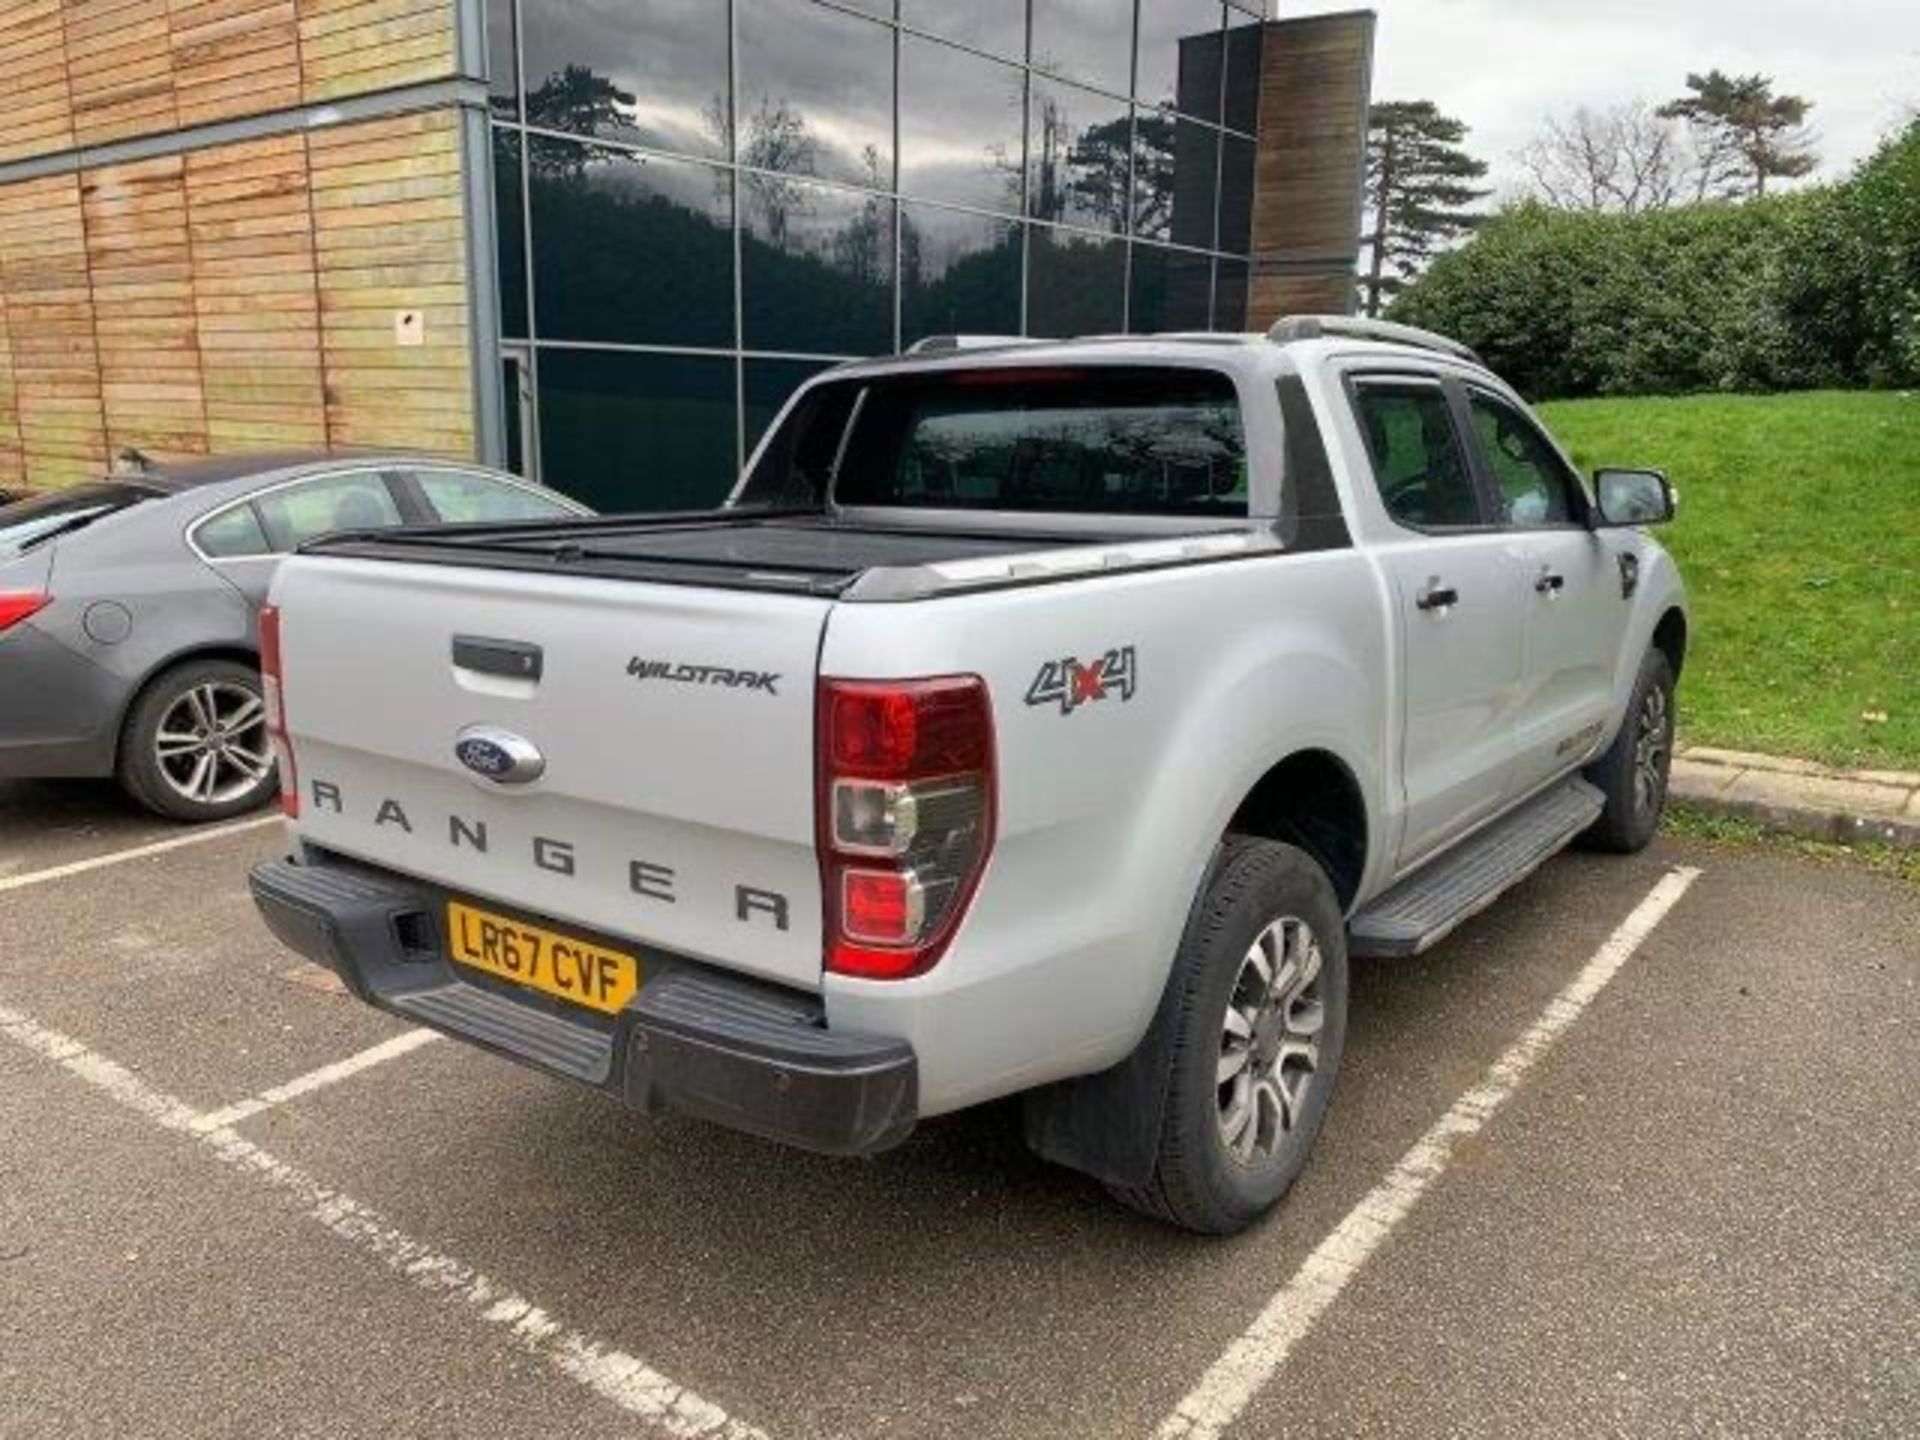 2017/67 REG FORD RANGER WILDTRAK 4X4 TDCI 3.2 DIESEL AUTO SILVER PICK-UP, SHOWING 1 FORMER KEEPER - Image 5 of 7